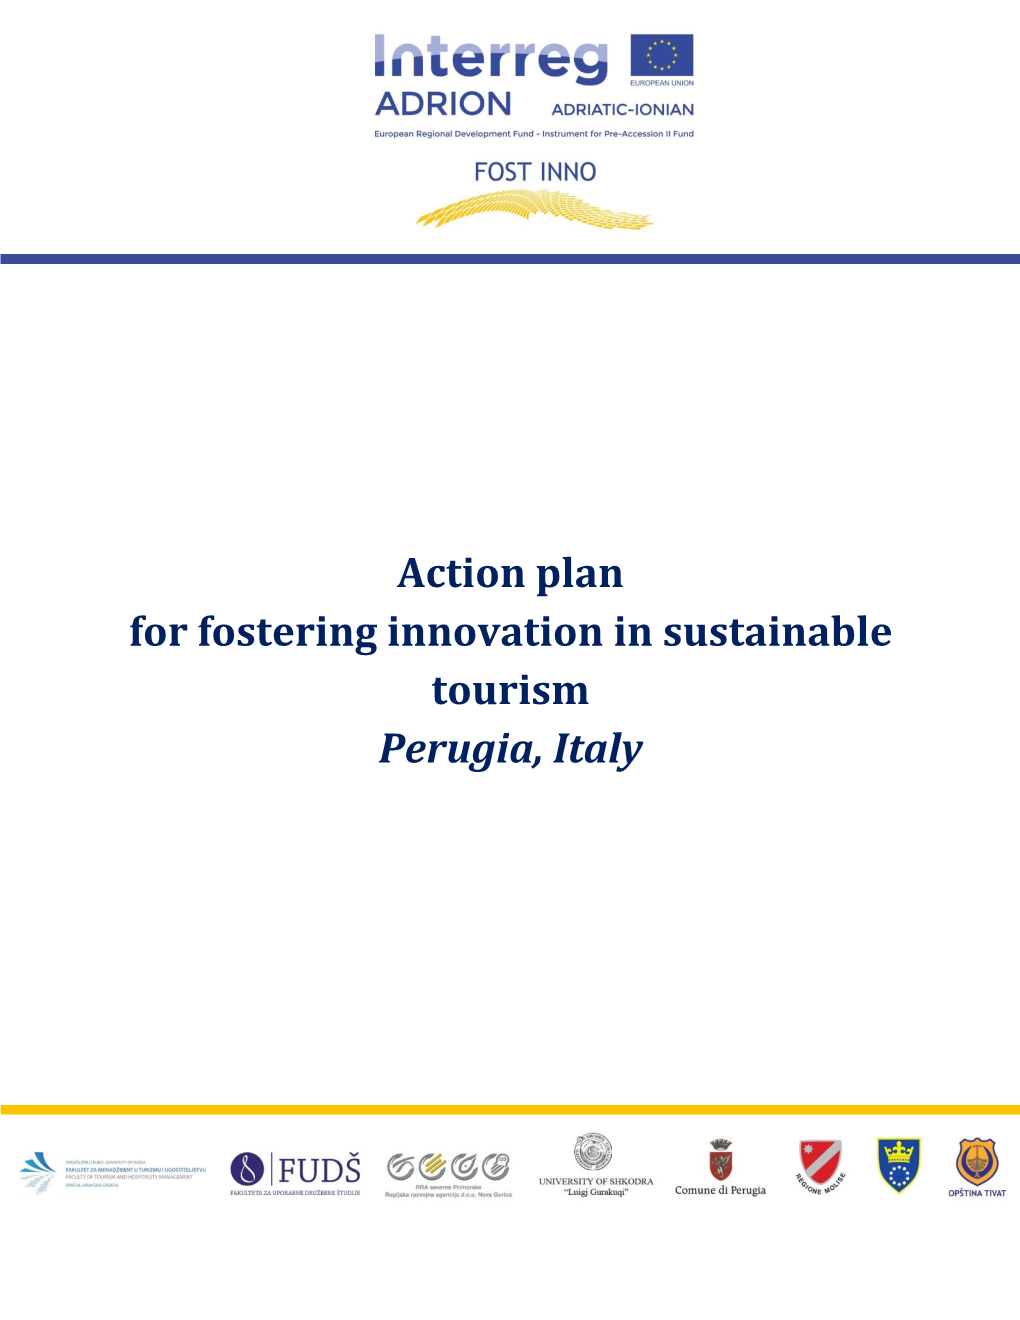 Action Plan for Fostering Innovation in Sustainable Tourism Perugia, Italy